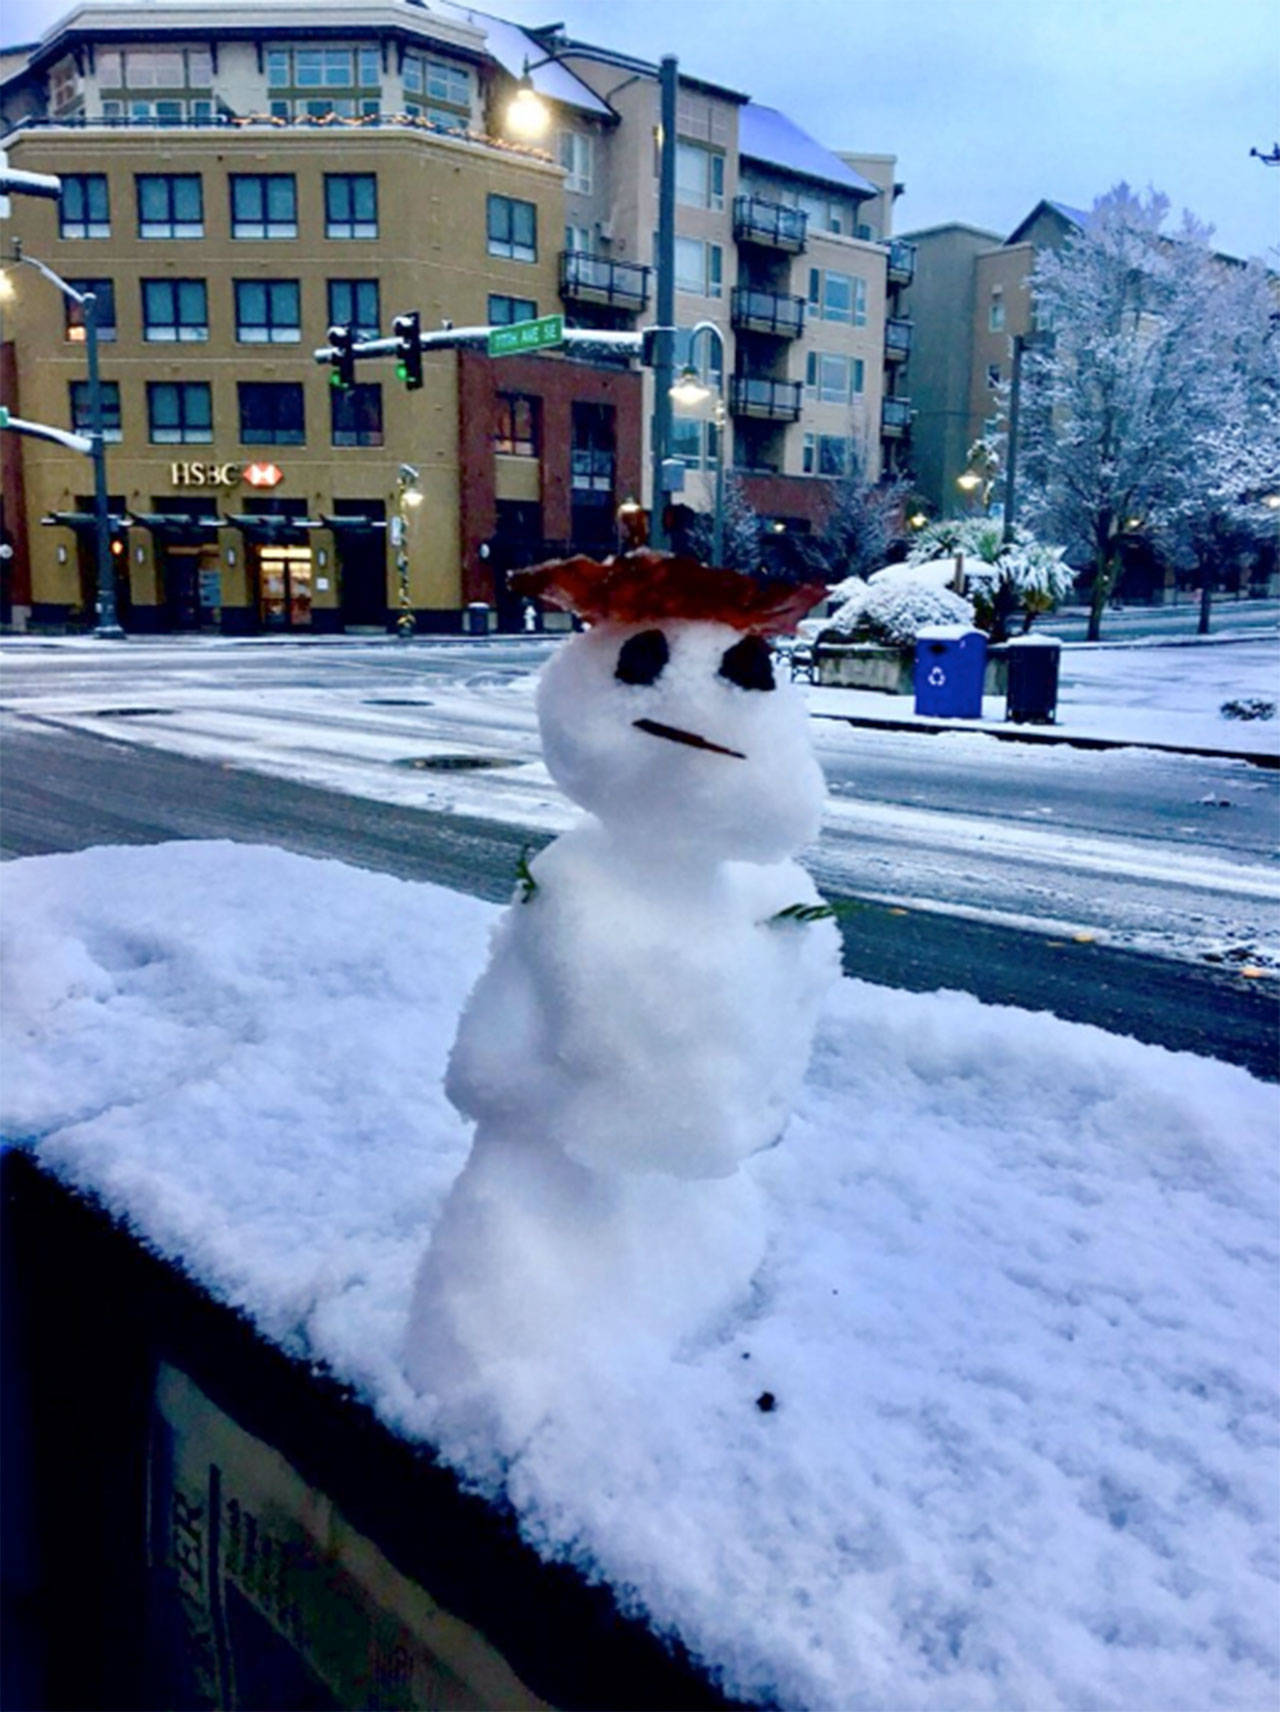 Islanders collaborated on this “community snowman project” in downtown Mercer Island, said Jay Gleason. The snowman was already on a mailbox, and Gary Umemoto added the hat, the face and the arms. Photo courtesy of Jay Gleason